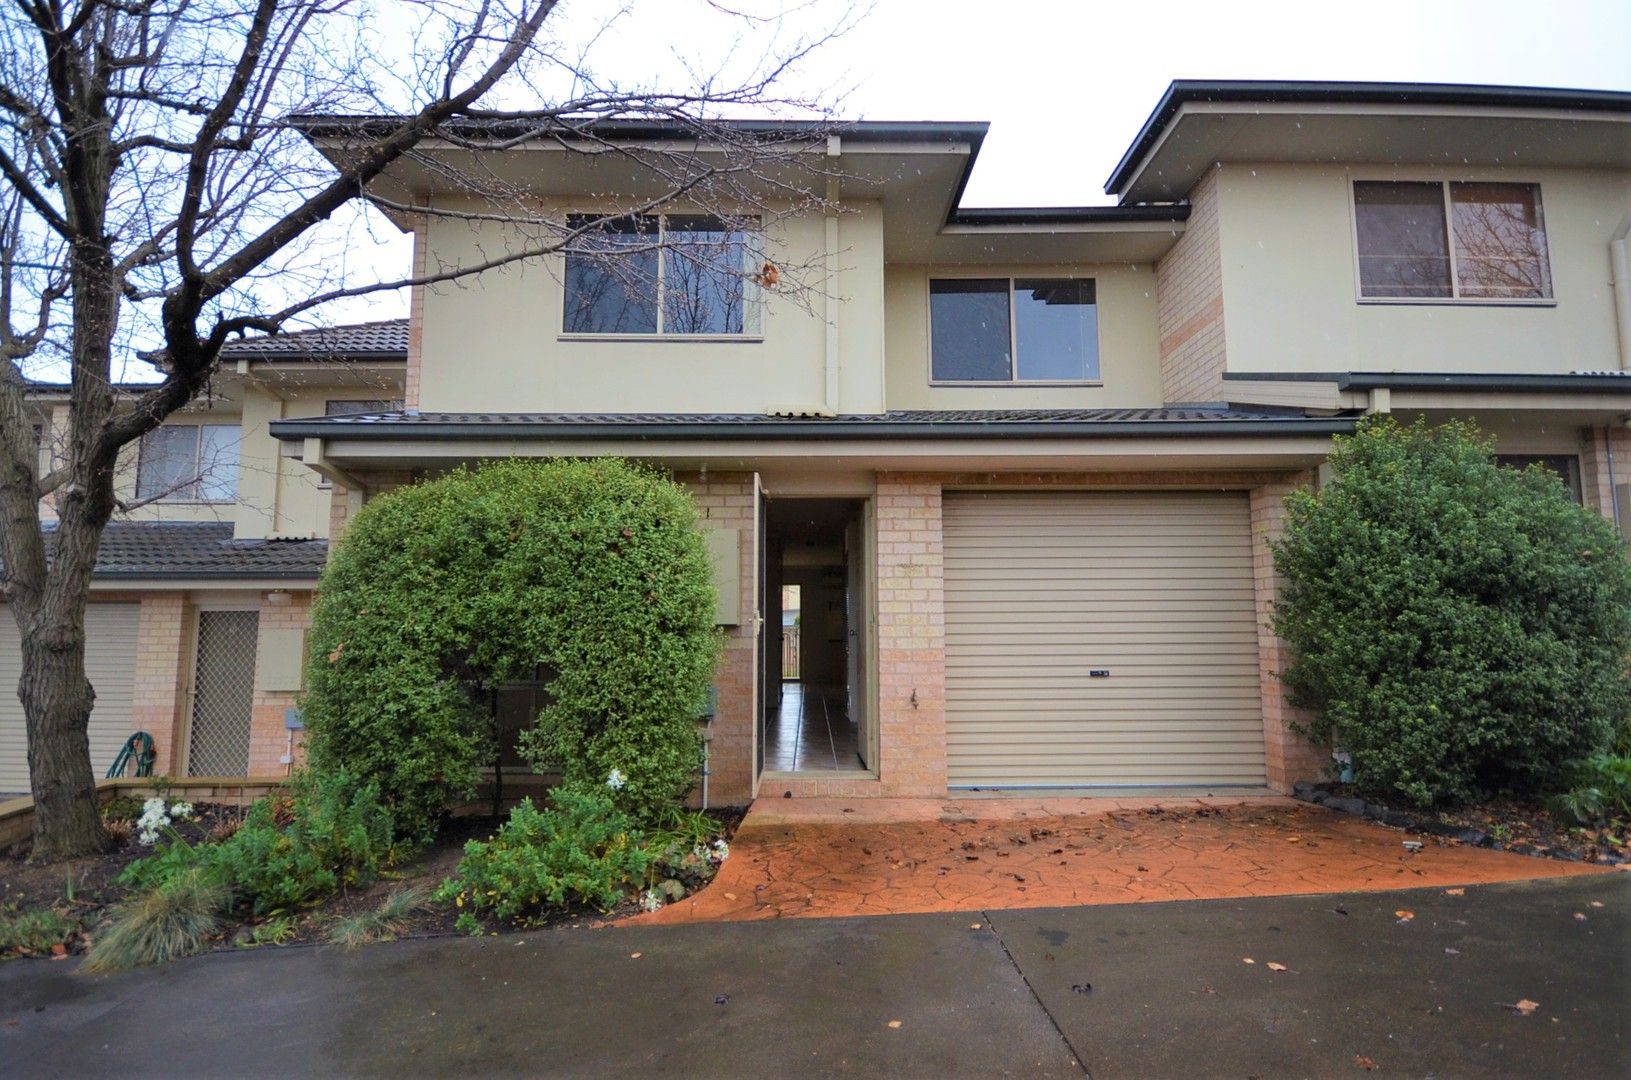 3 bedrooms Townhouse in 28/68 Paul Coe Crescent NGUNNAWAL ACT, 2913